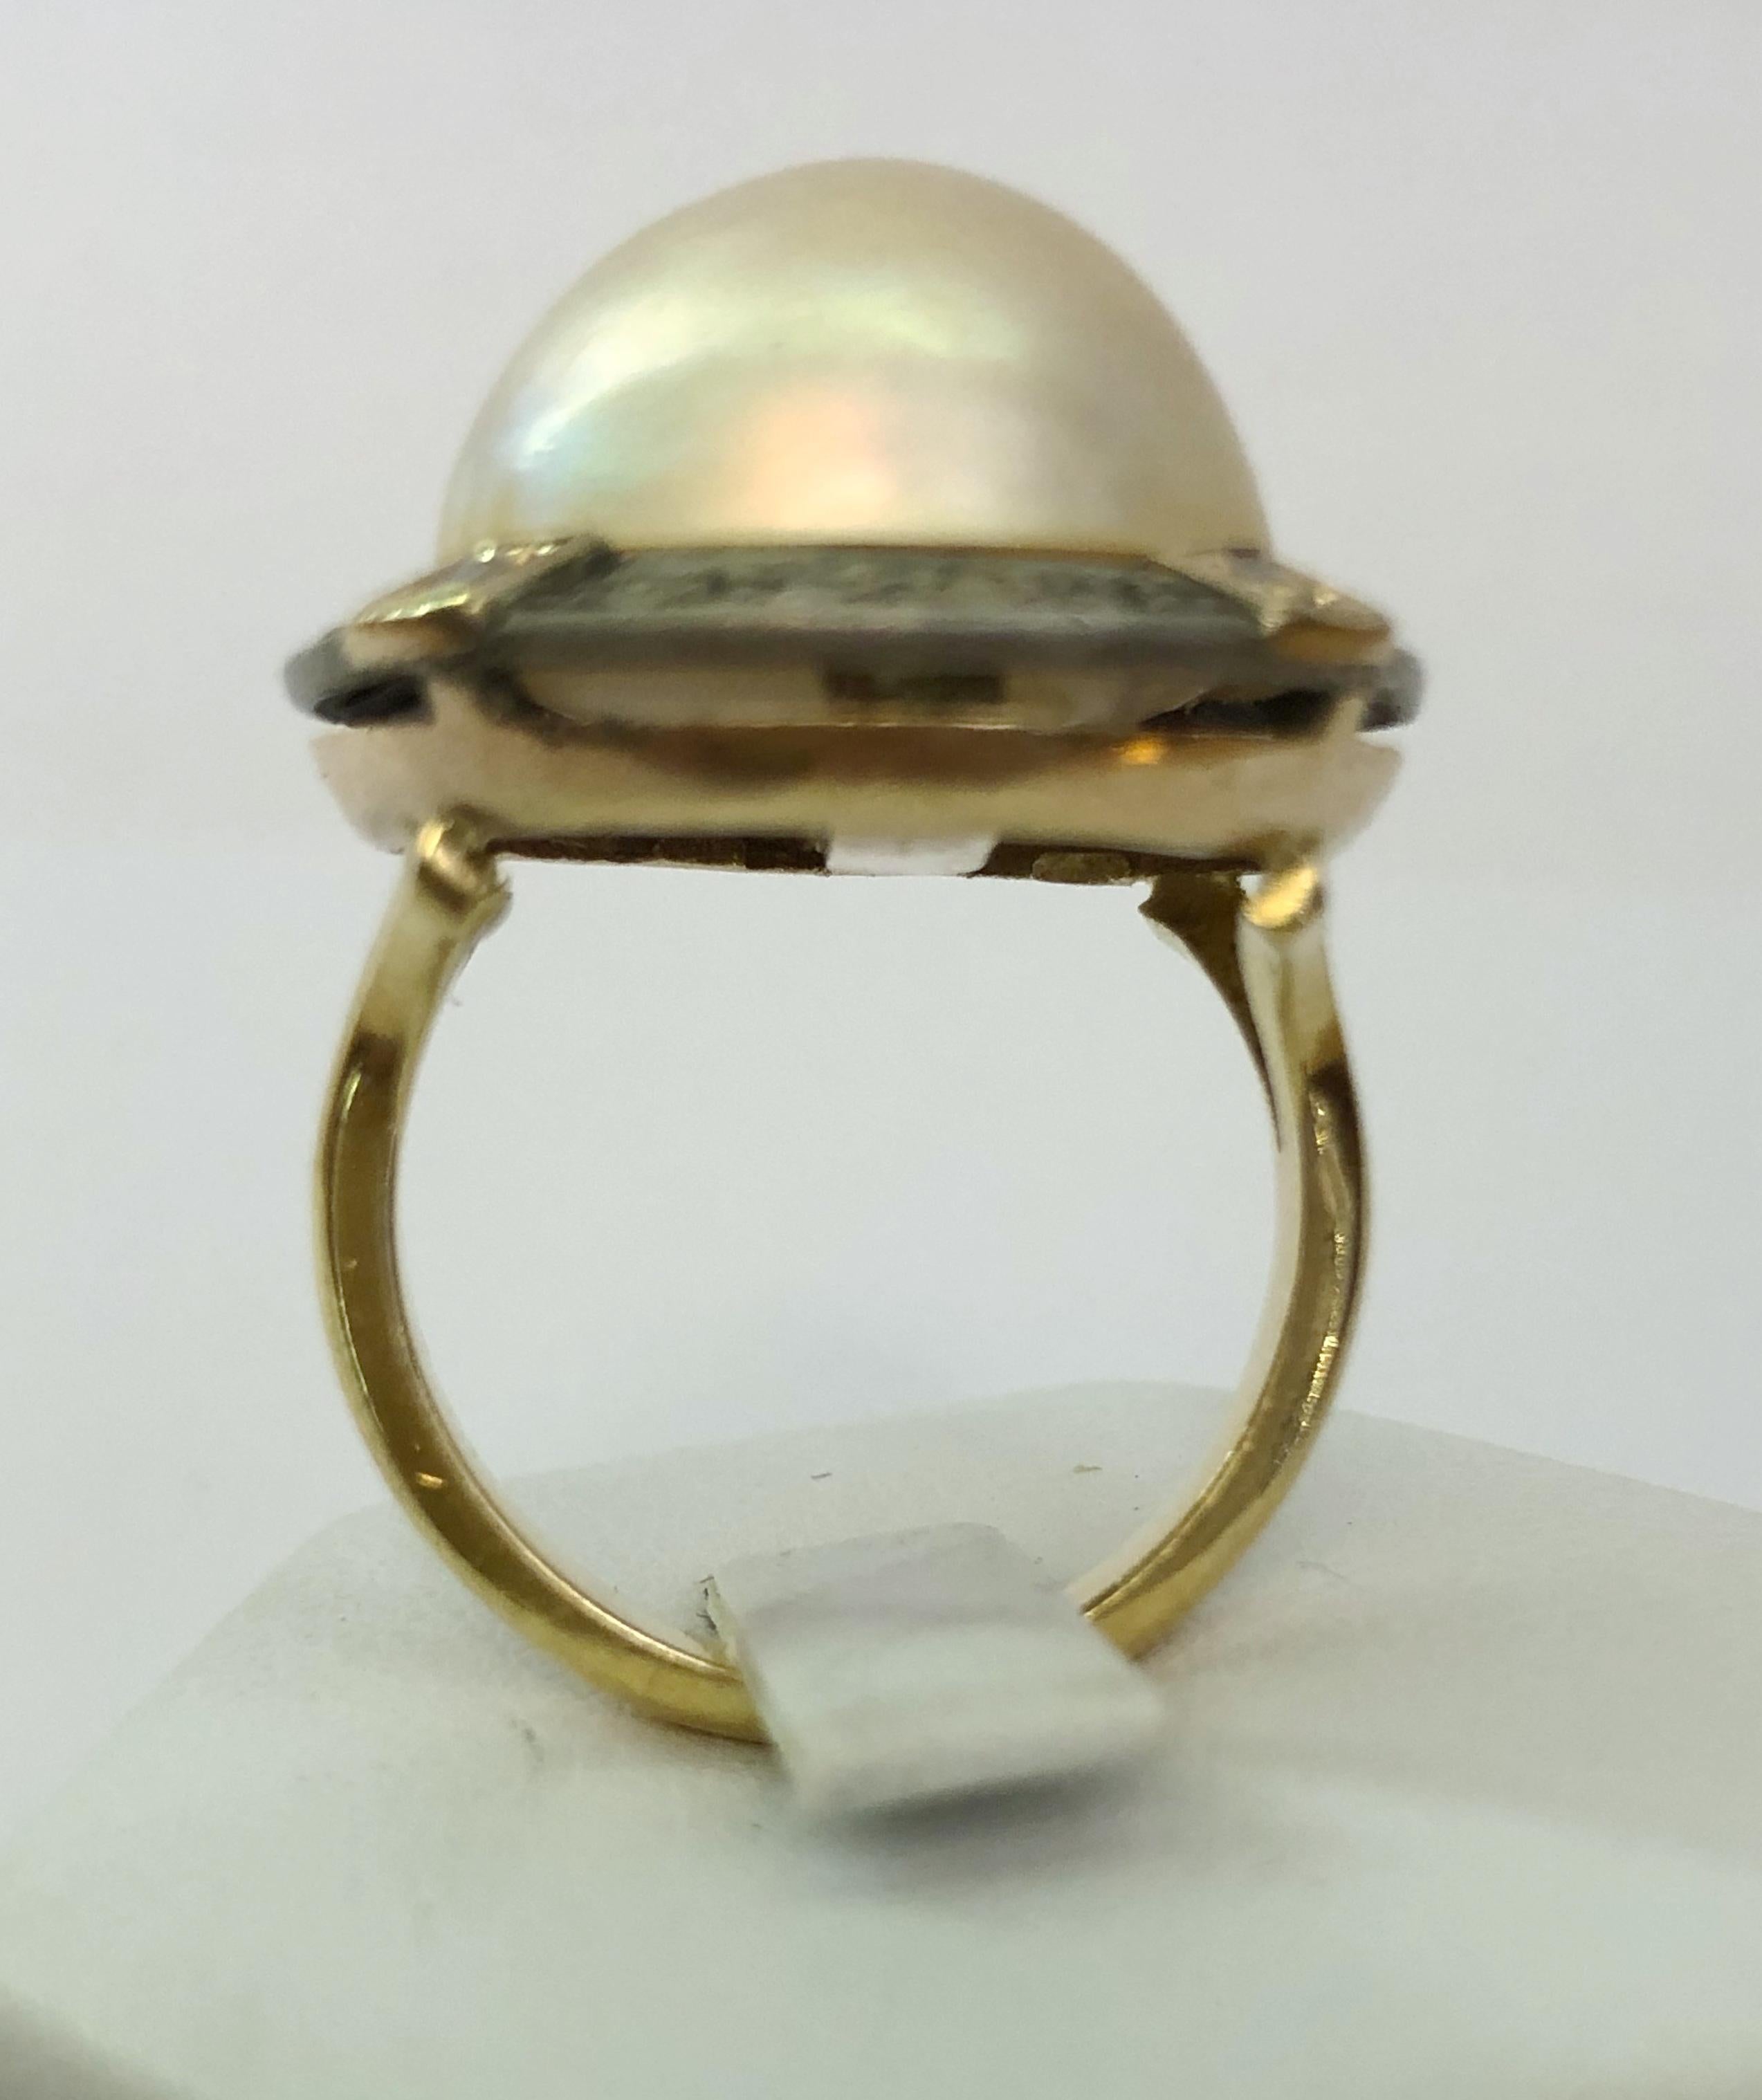 14 karat yellow gold ring with a Mabel pearl and surrounding diamonds / Made in Italy 1950s
Ring size US 6.5